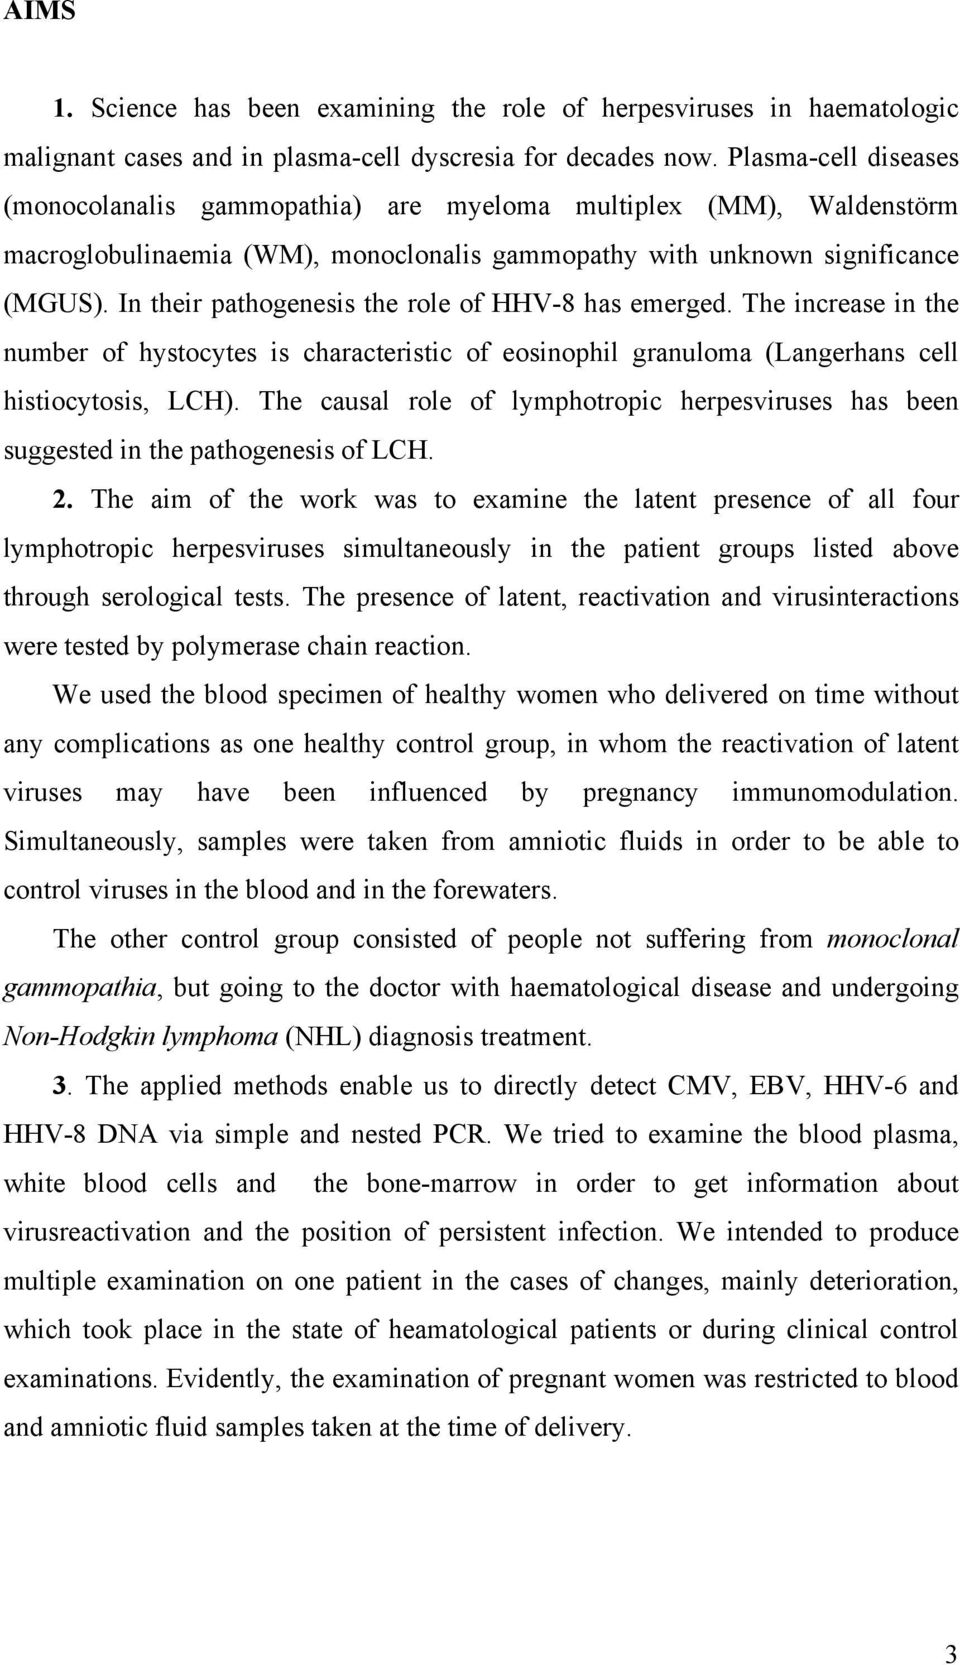 In their pathogenesis the role of HHV-8 has emerged. The increase in the number of hystocytes is characteristic of eosinophil granuloma (Langerhans cell histiocytosis, LCH).